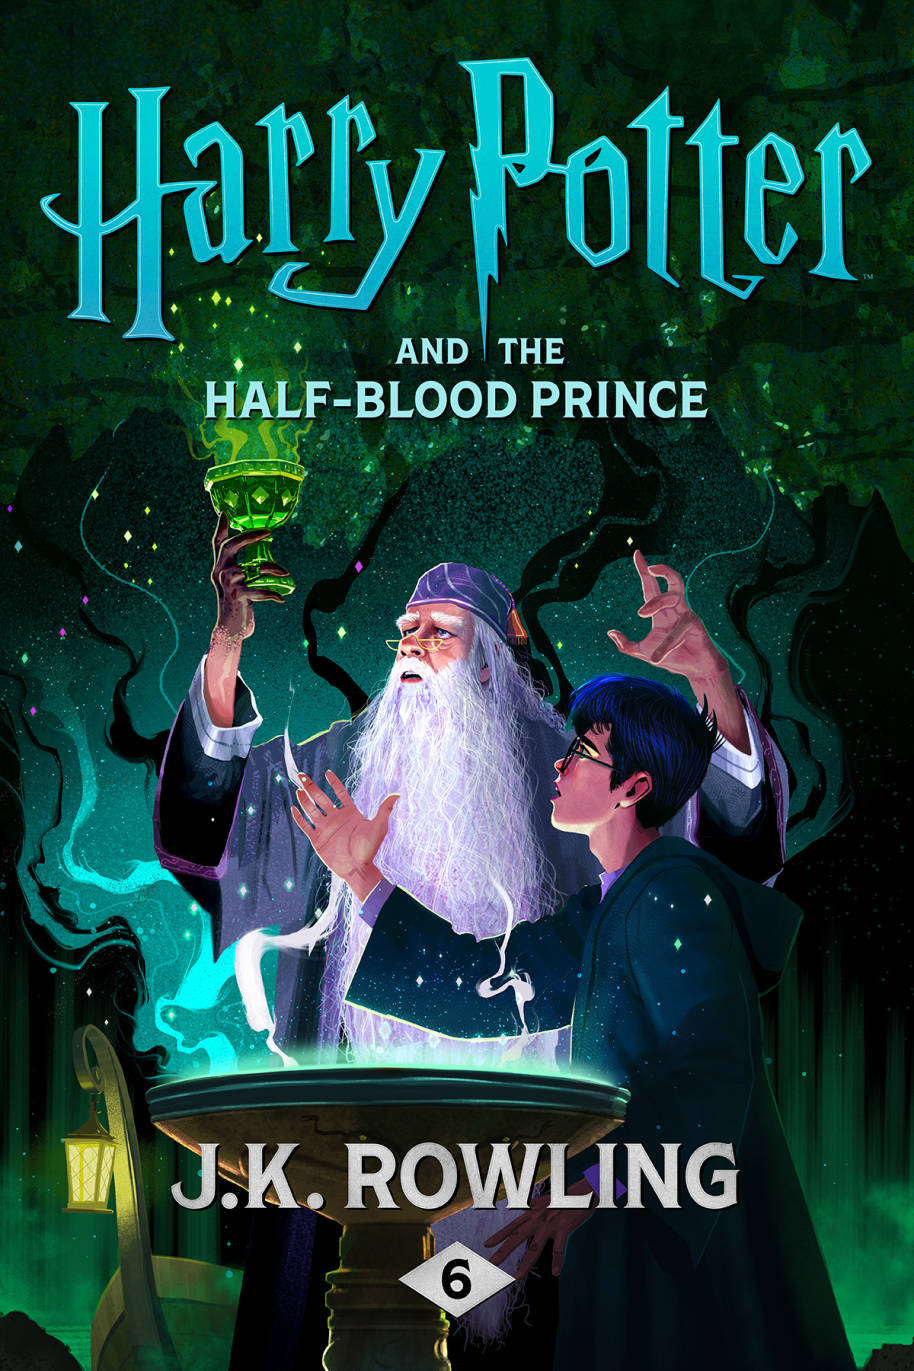 Harry Potter New Book Covers Cheap Sell, Save 59% | jlcatj.gob.mx